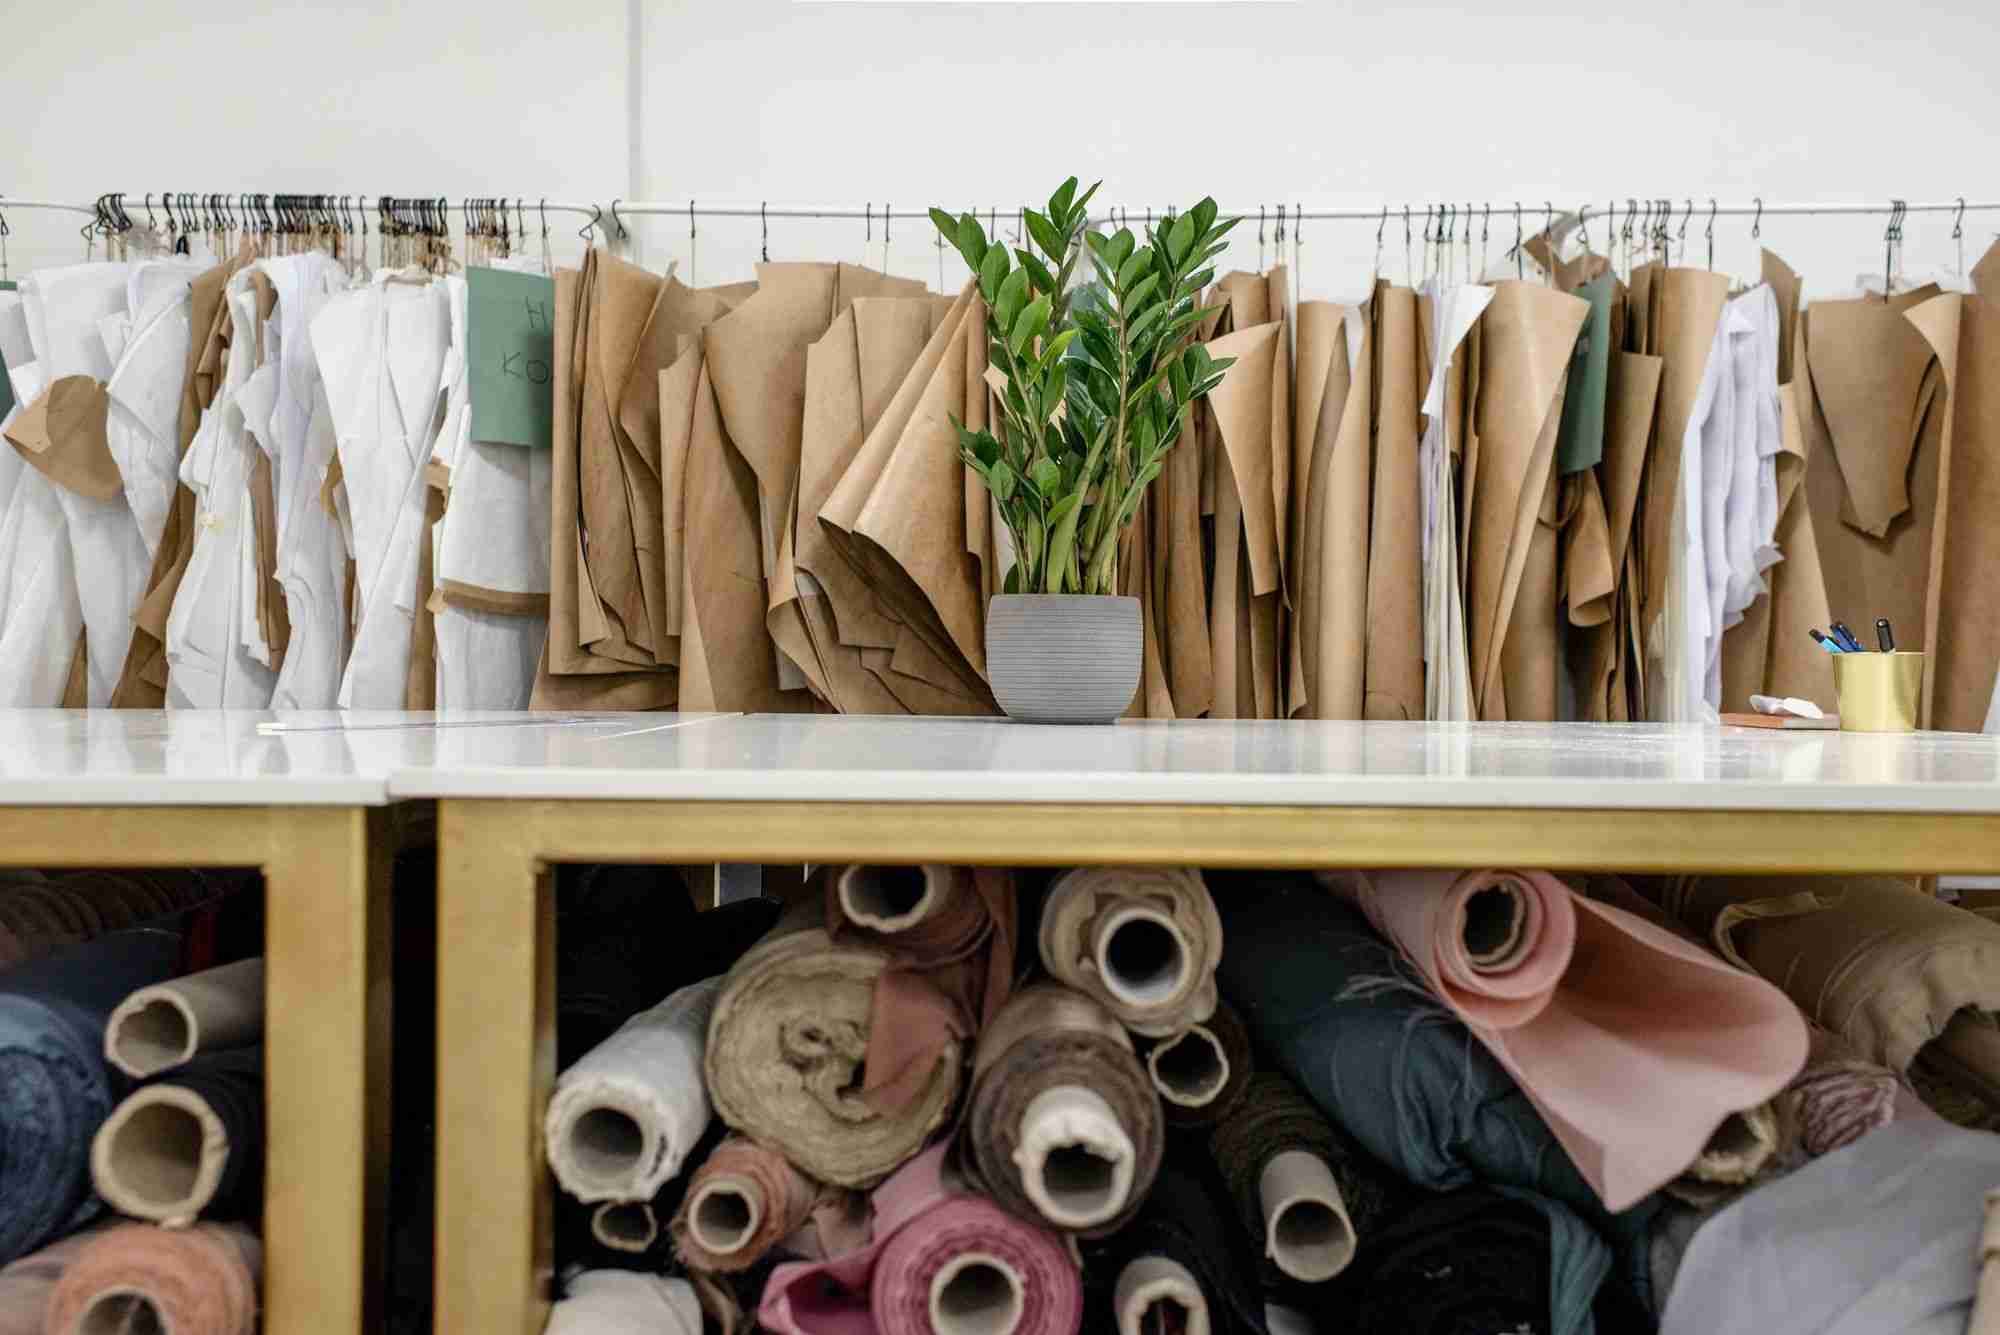 How to Find and Buy Upcycled Fashion: The Latest Guide For The Eco-Friendly Shopper